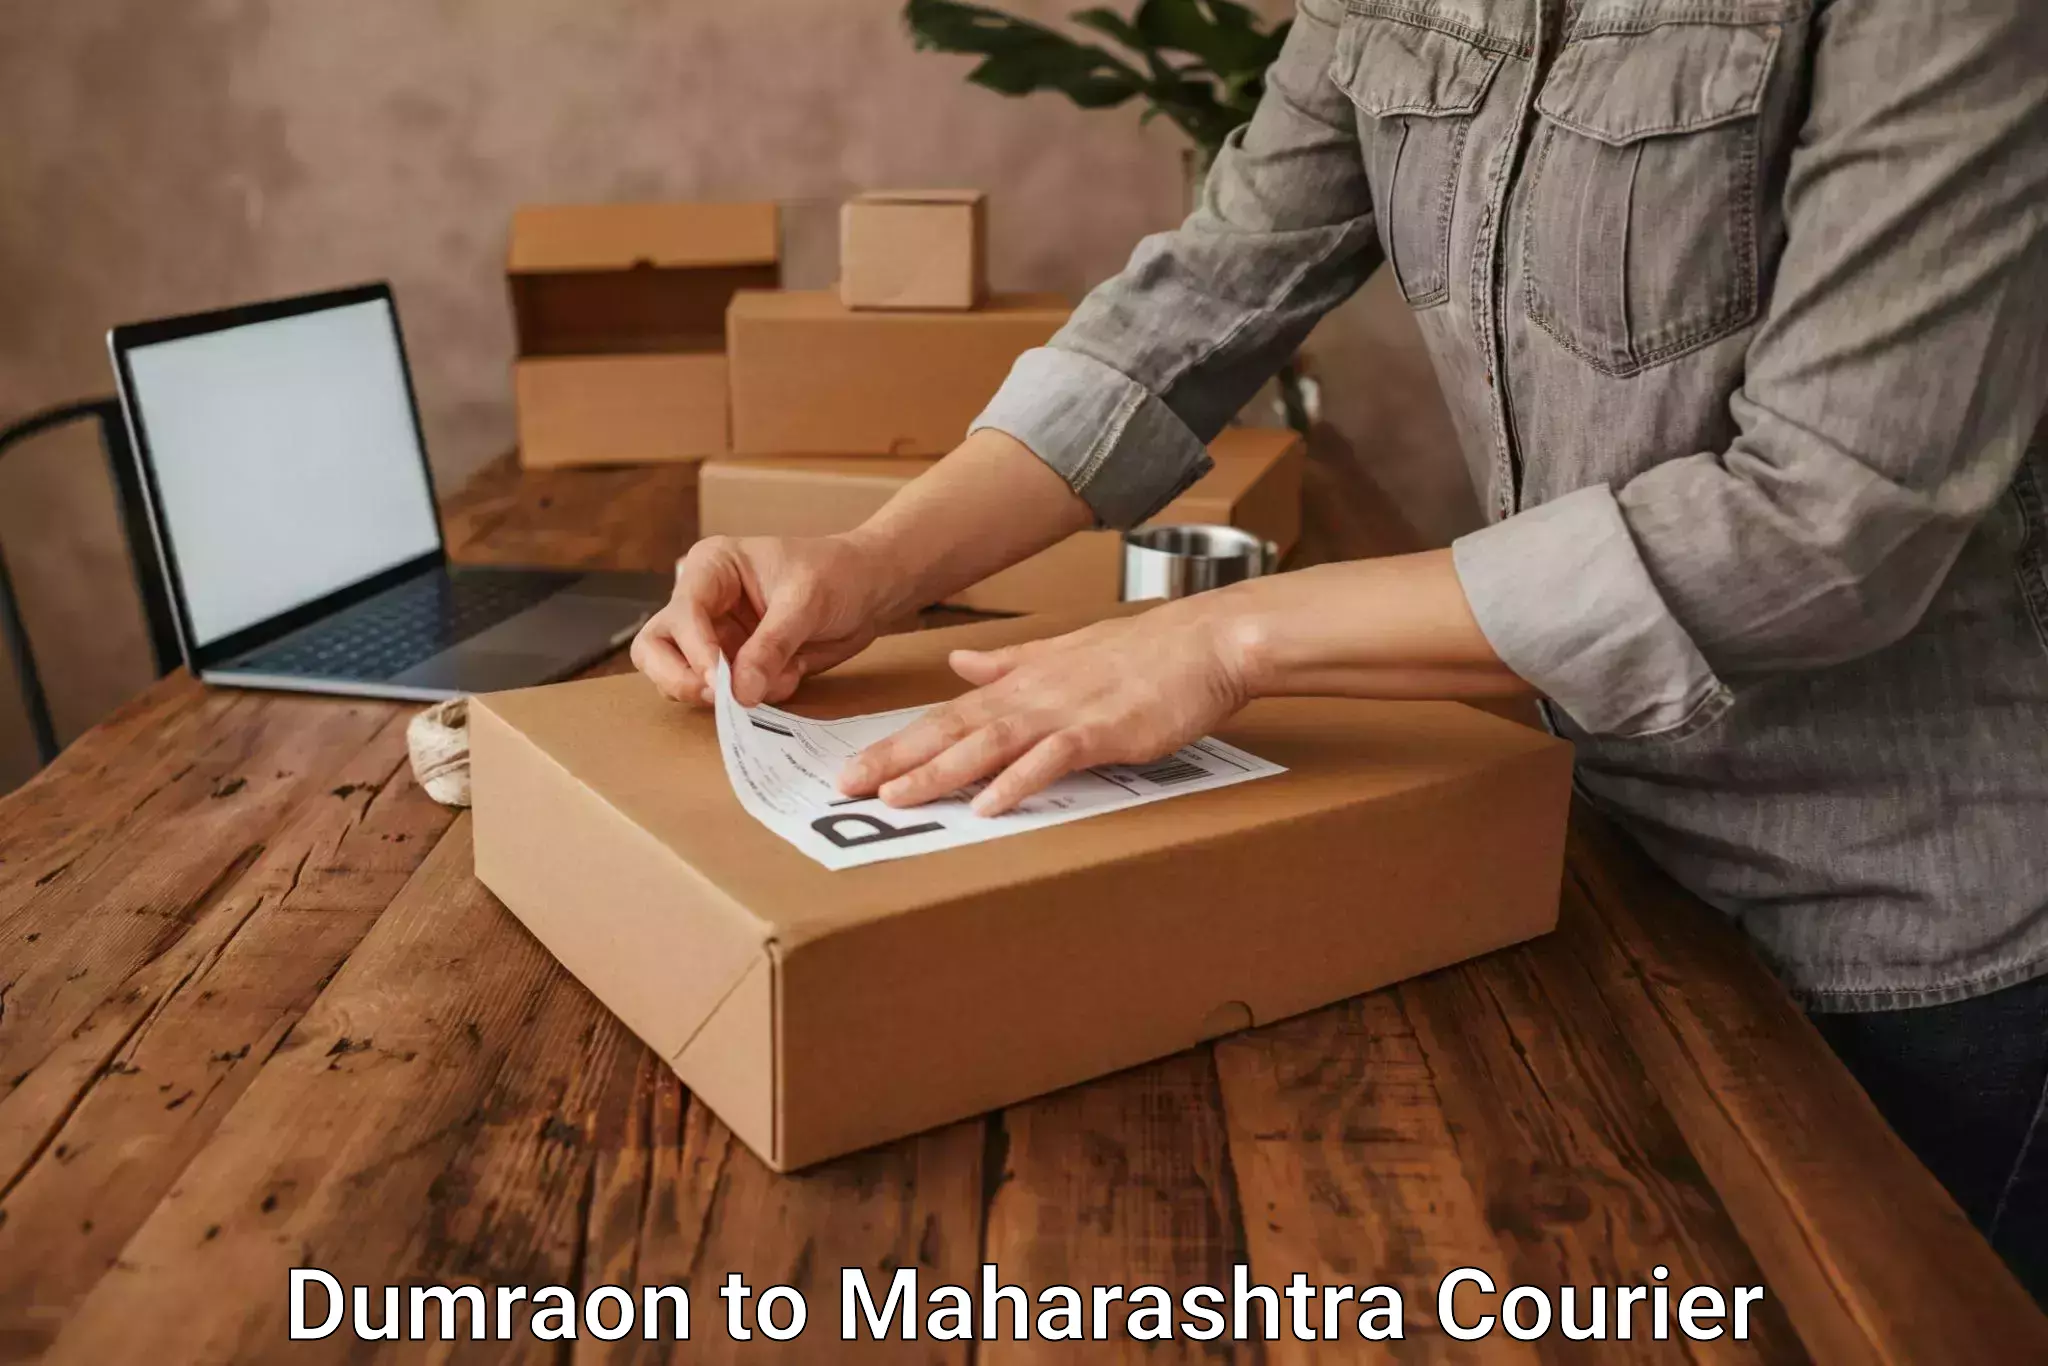 Budget-friendly moving services in Dumraon to Kalyan Dombivli